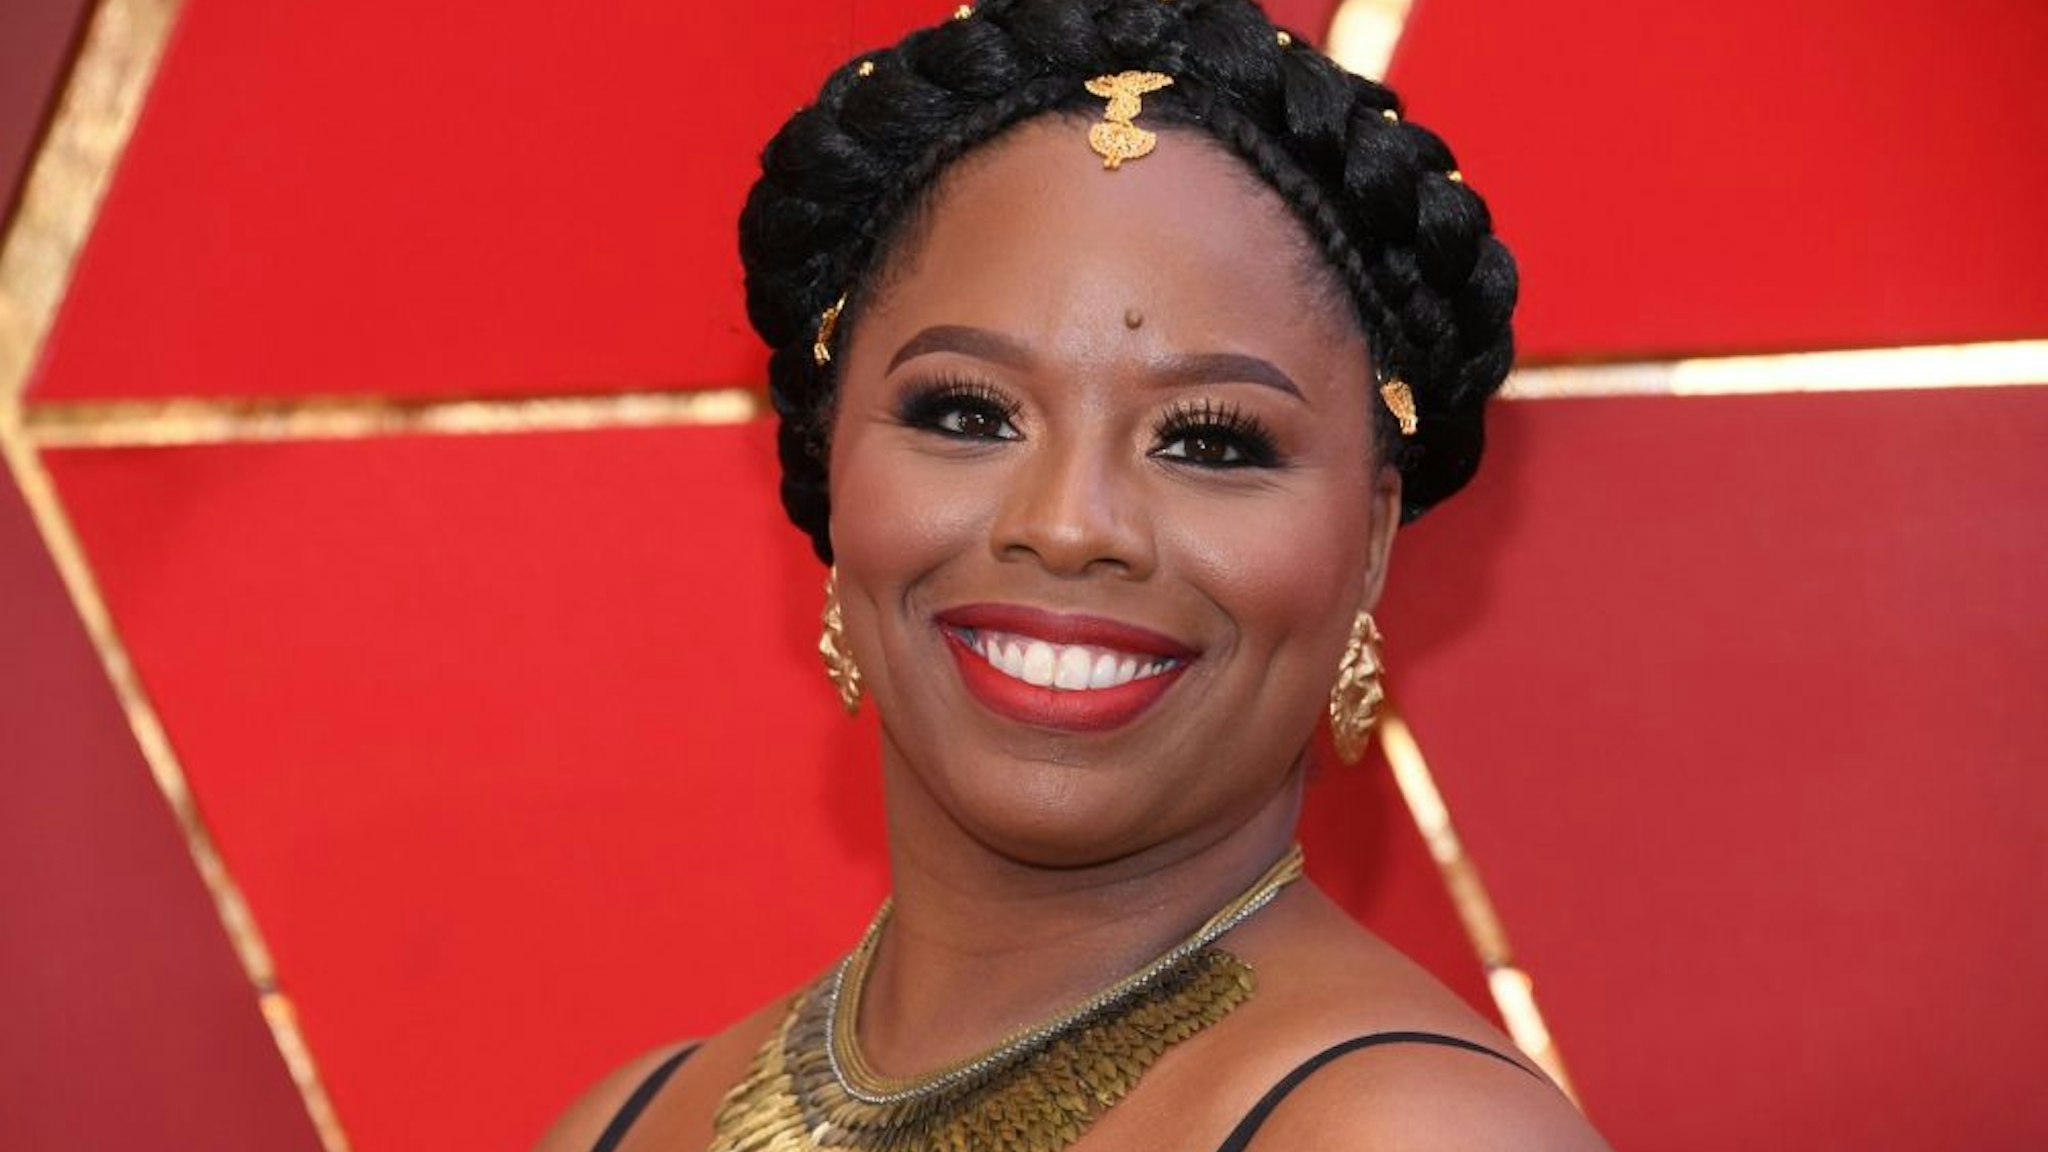 HOLLYWOOD, CA - MARCH 04: Co-founder of the Black Lives Matter movement Patrisse Cullors attends the 90th Annual Academy Awards at Hollywood &amp; Highland Center on March 4, 2018 in Hollywood, California.